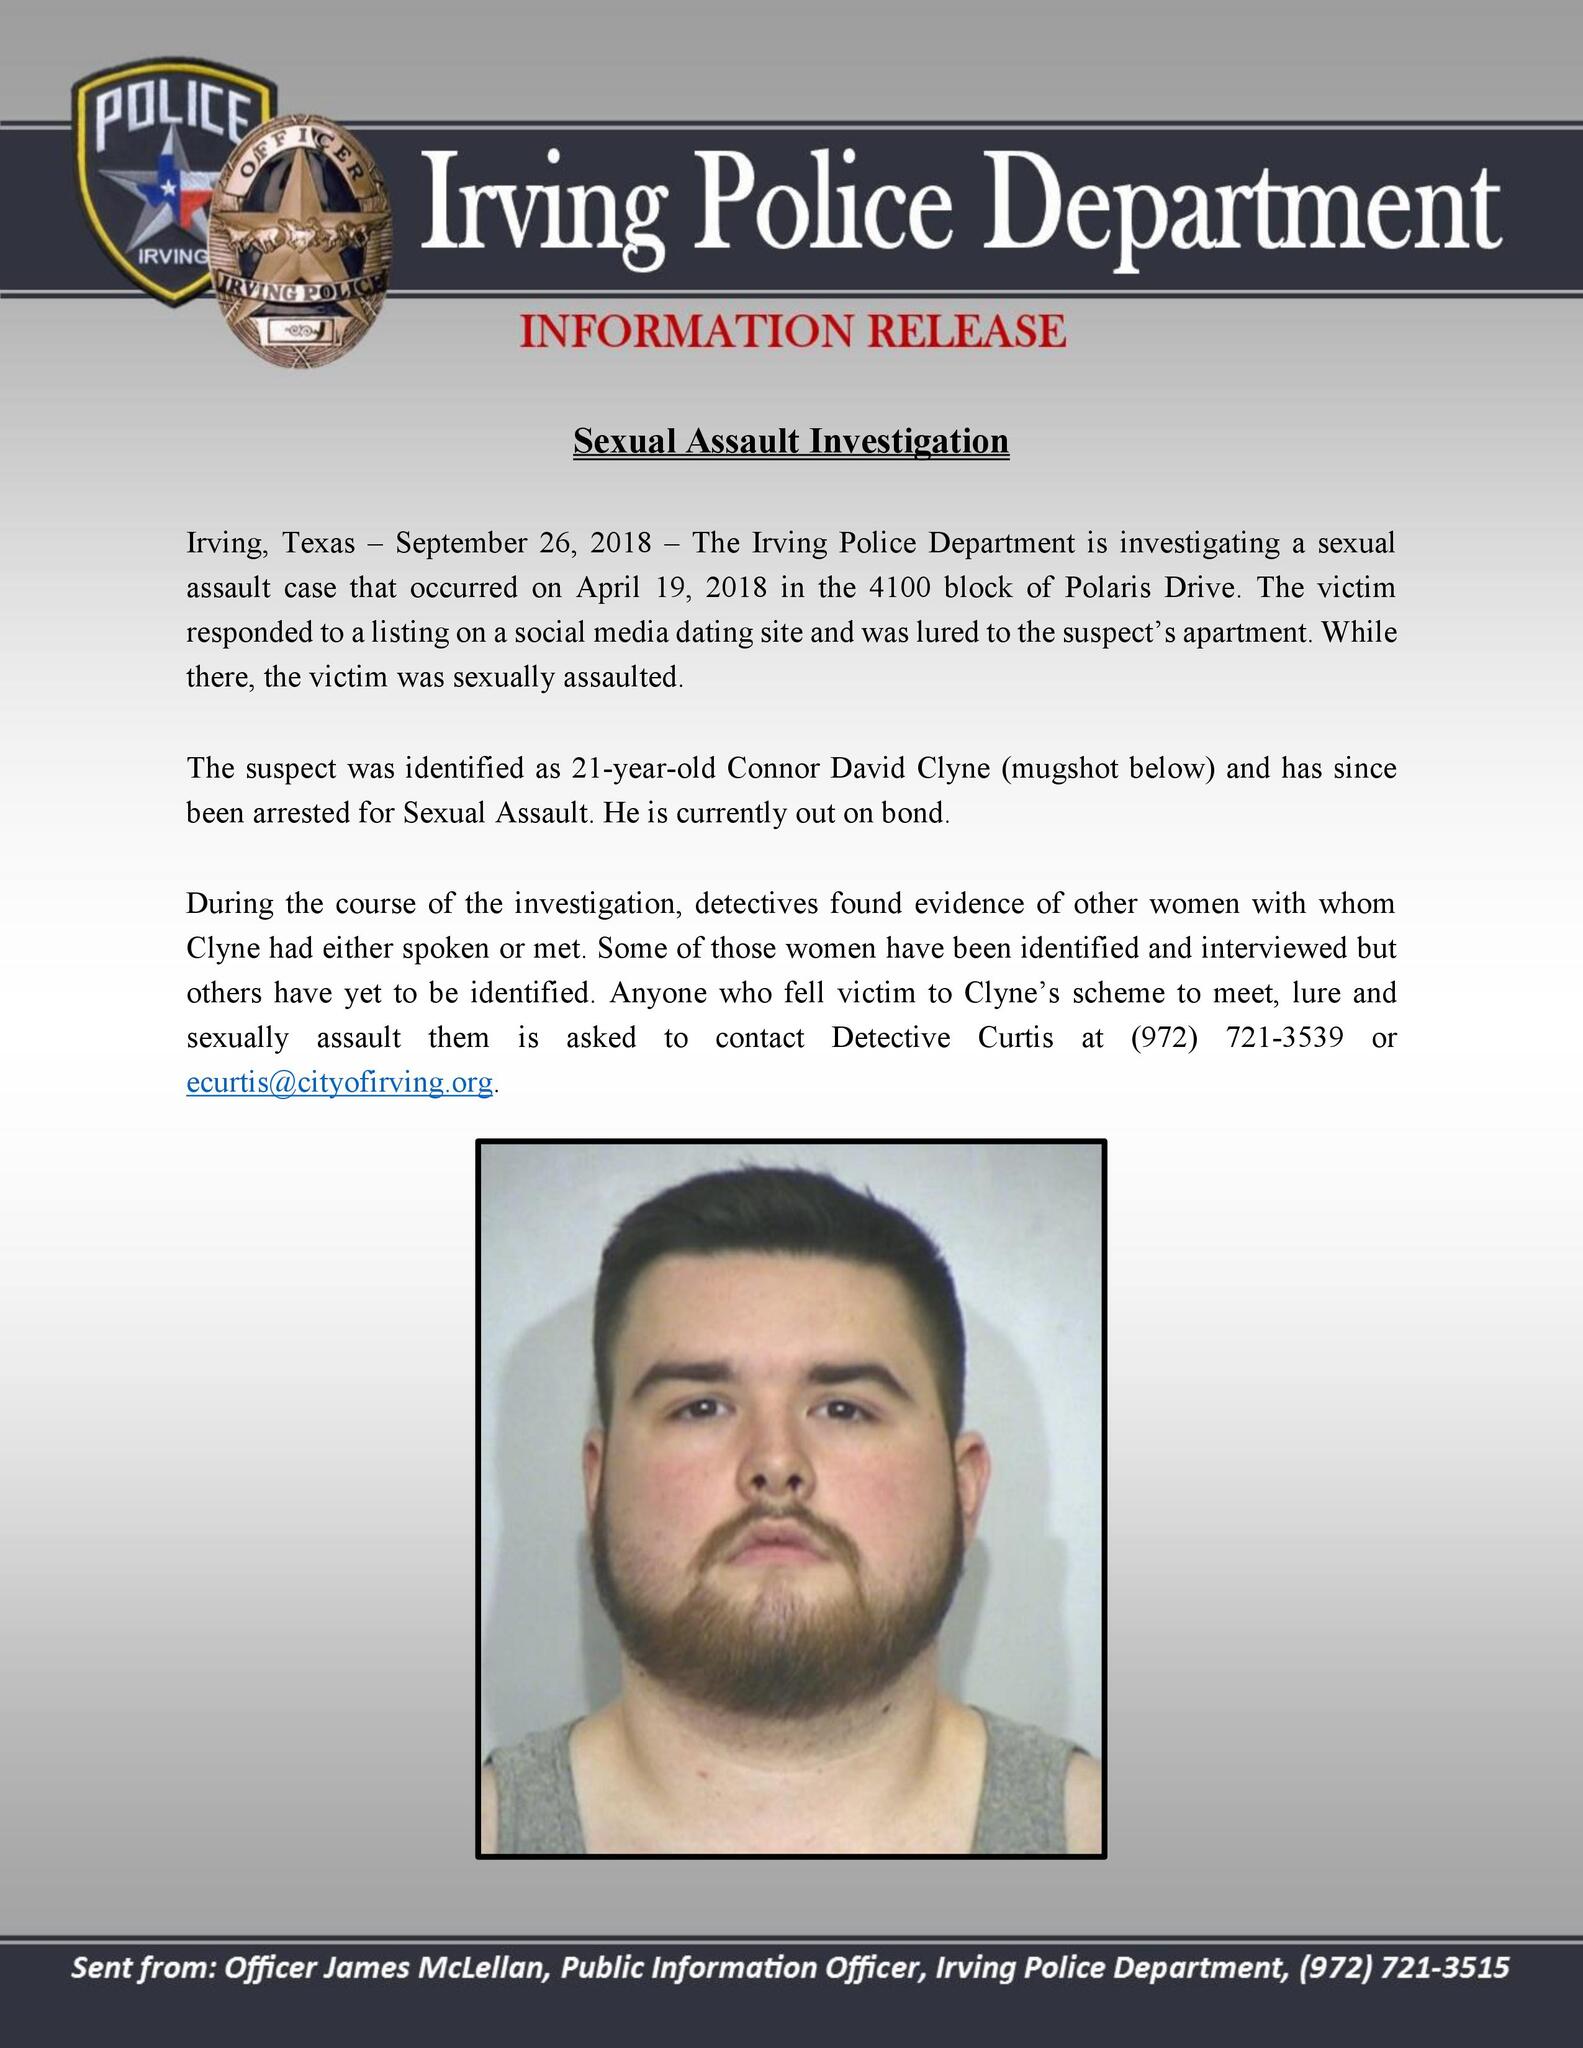 Media Release Sexual Assault Investigation (Irving Police Department